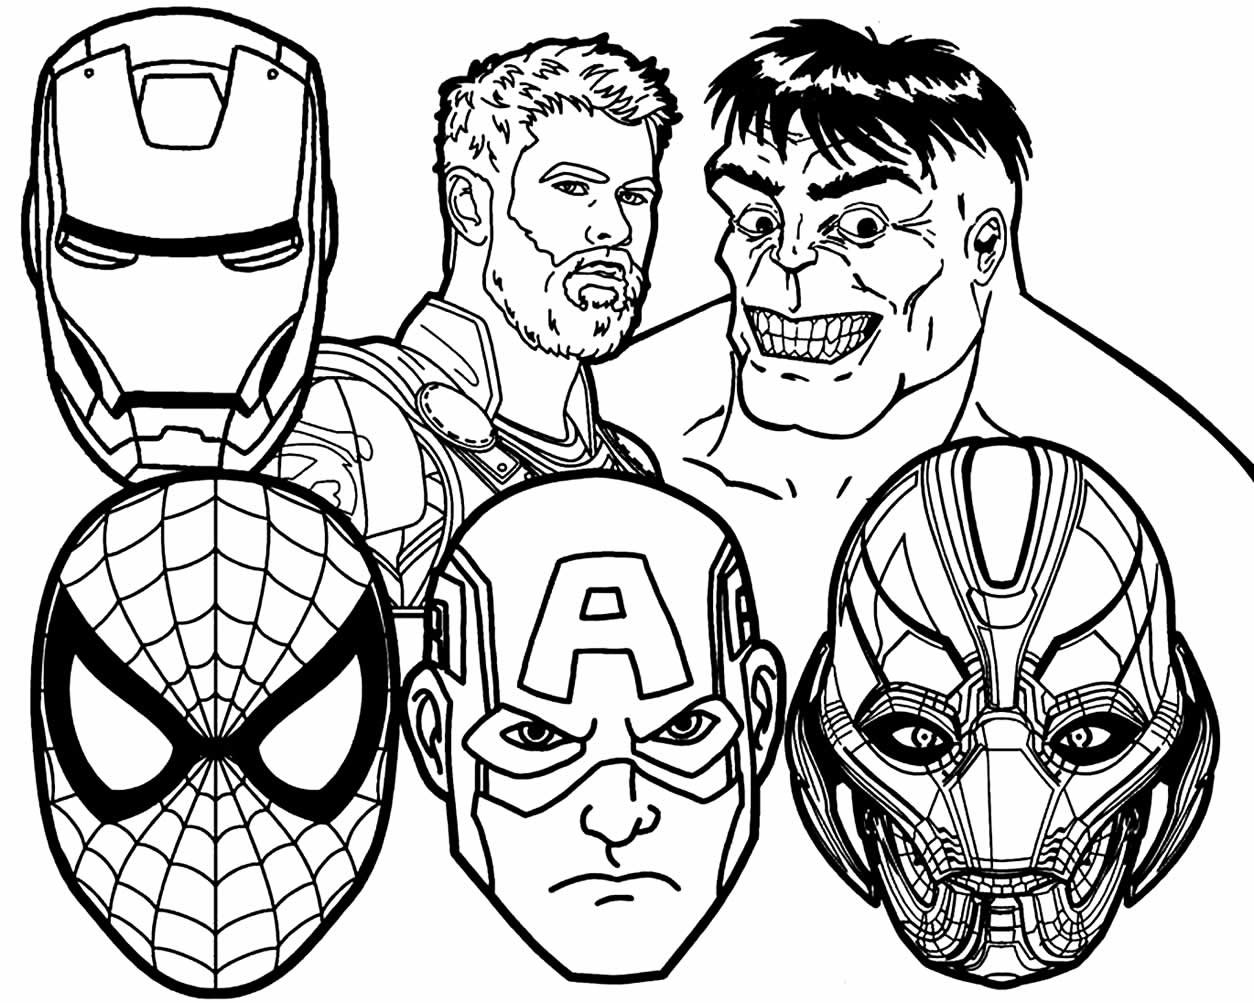 Crayola Coloring Pages Avengers Coloring Pages Superhero Coloring ...